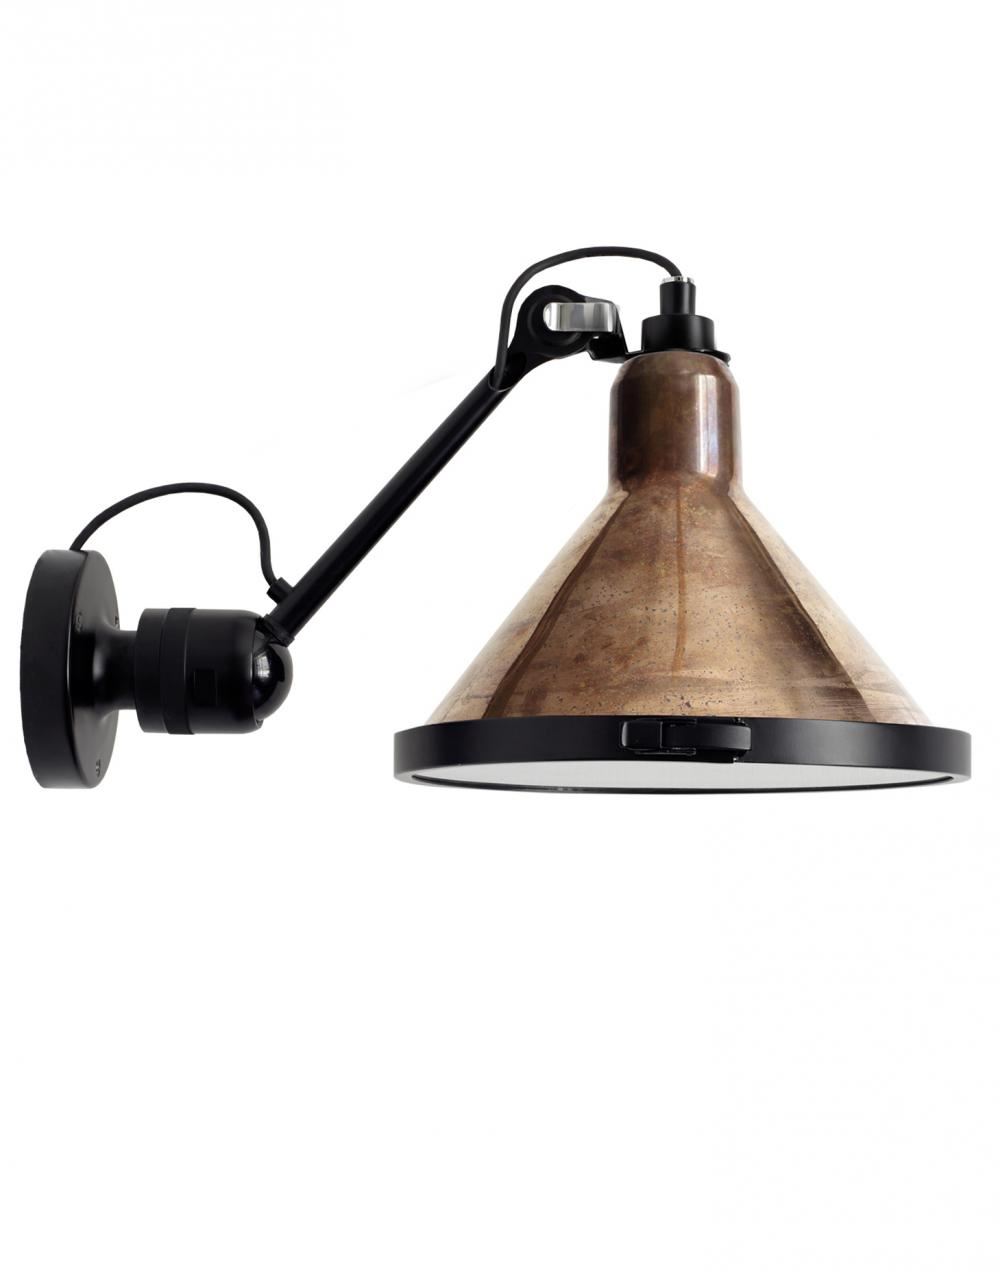 Lampe Gras 304 Xl Outdoor Wall Light Black Arm Raw Copper Shade With White Interior Conic